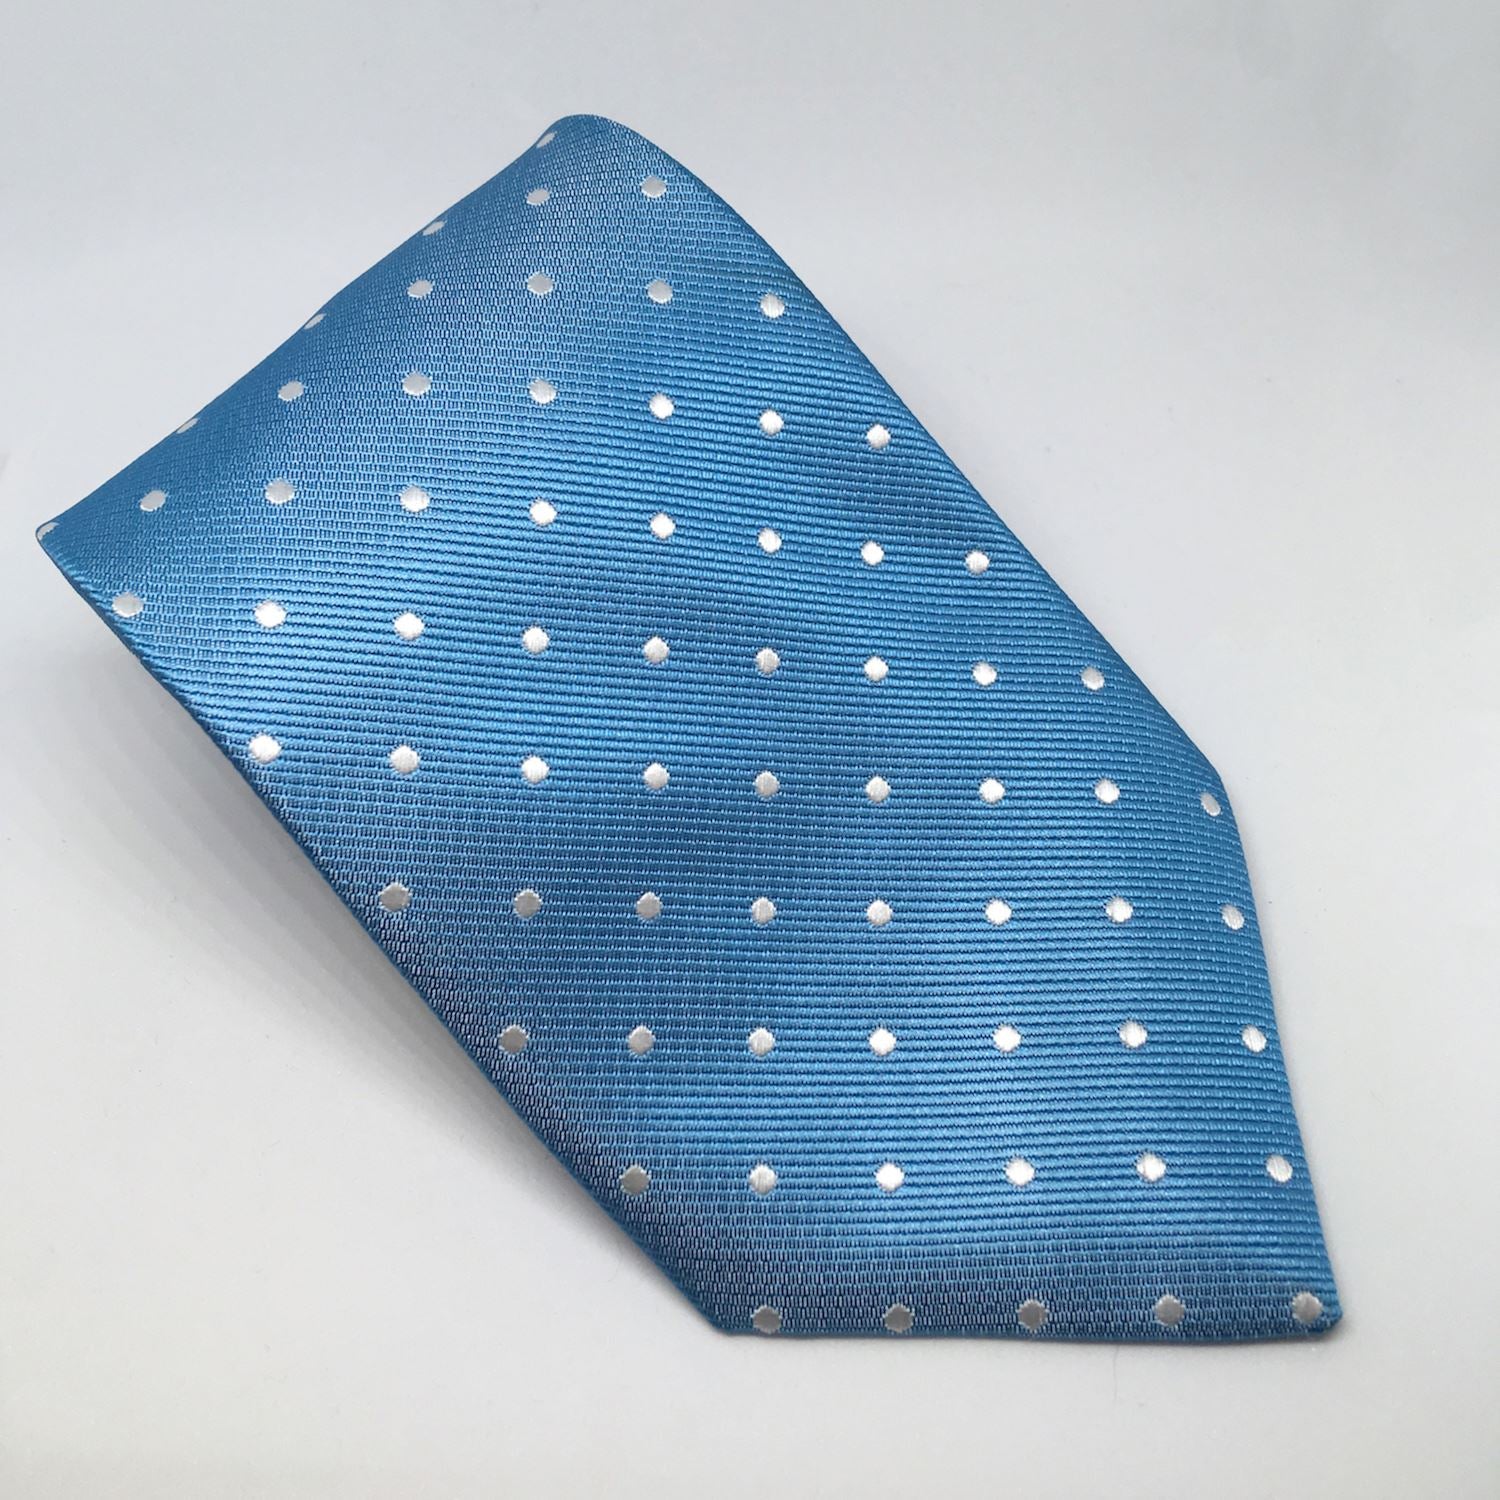 Equetech Junior Polka Dot Show Tie - Just Horse Riders